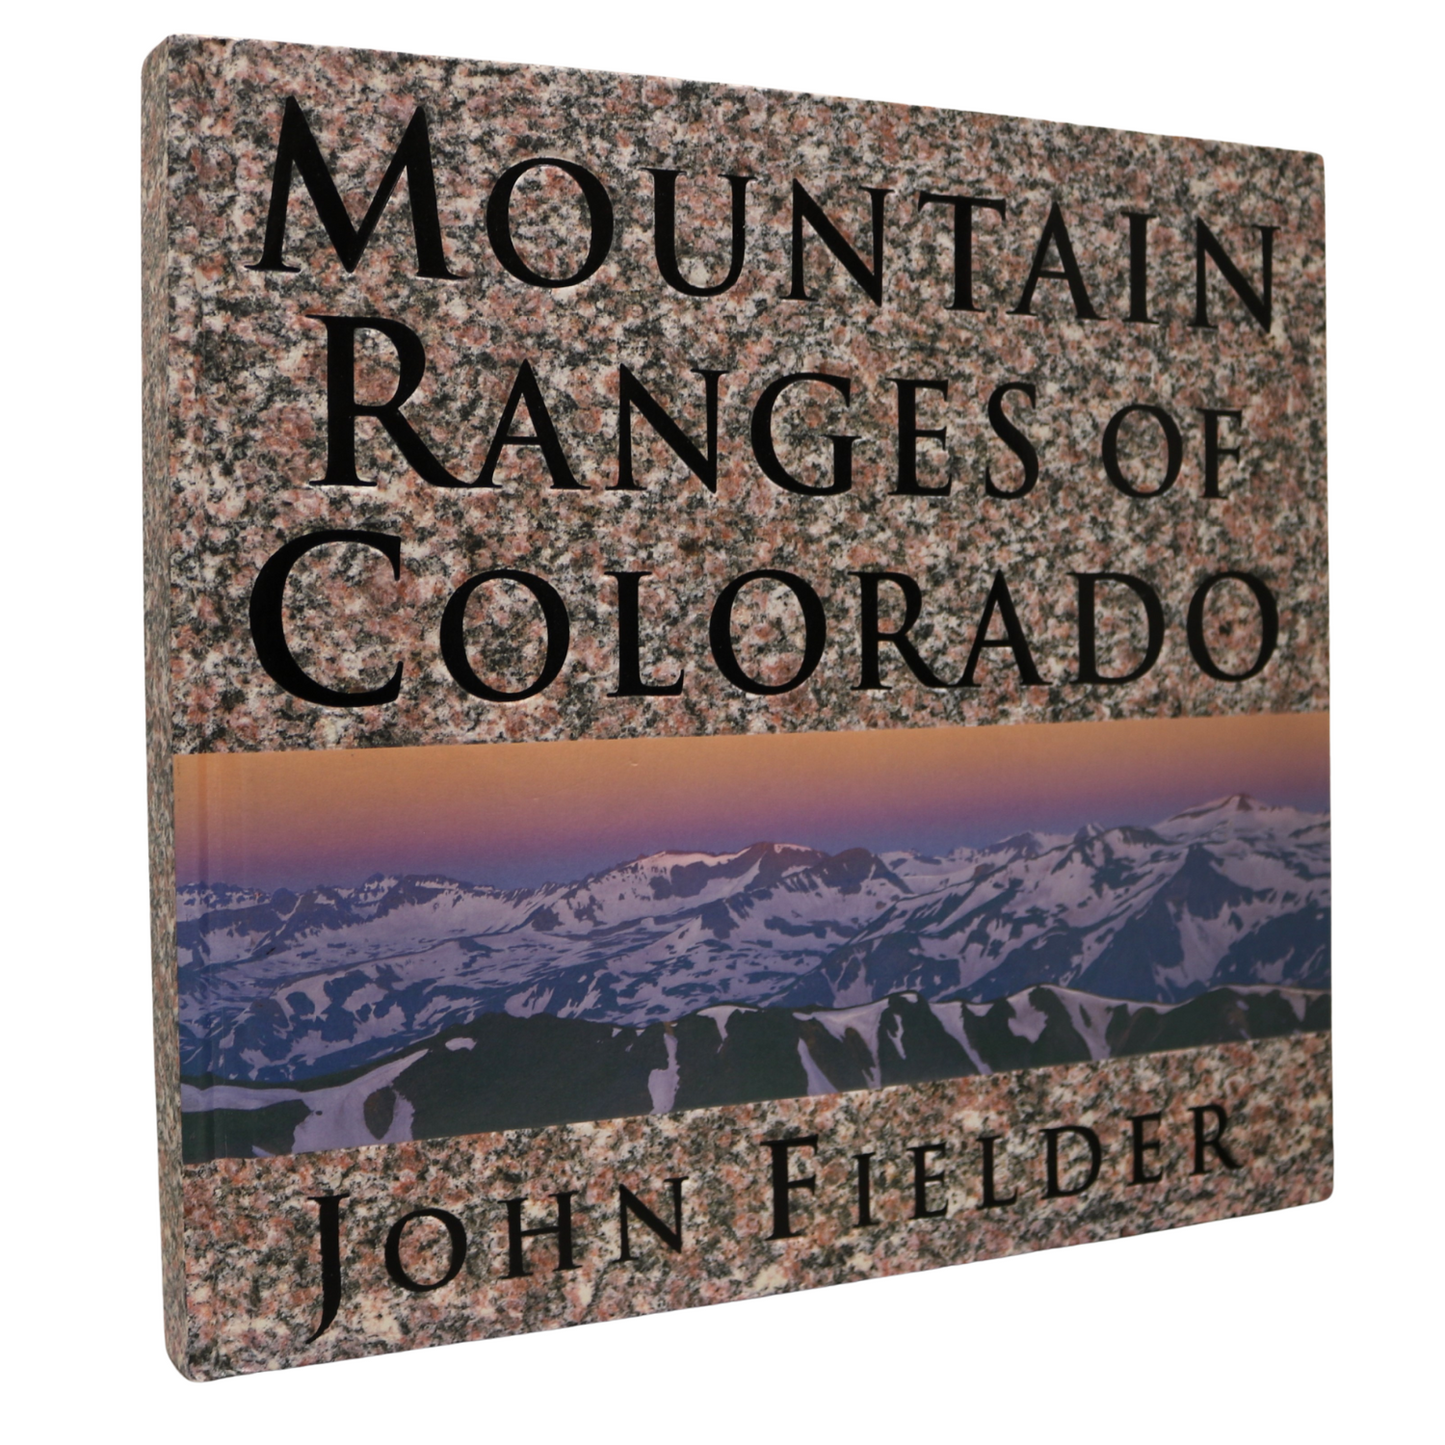 Mountain Ranges Colorado John Fielder Photography Landscapes Used Book